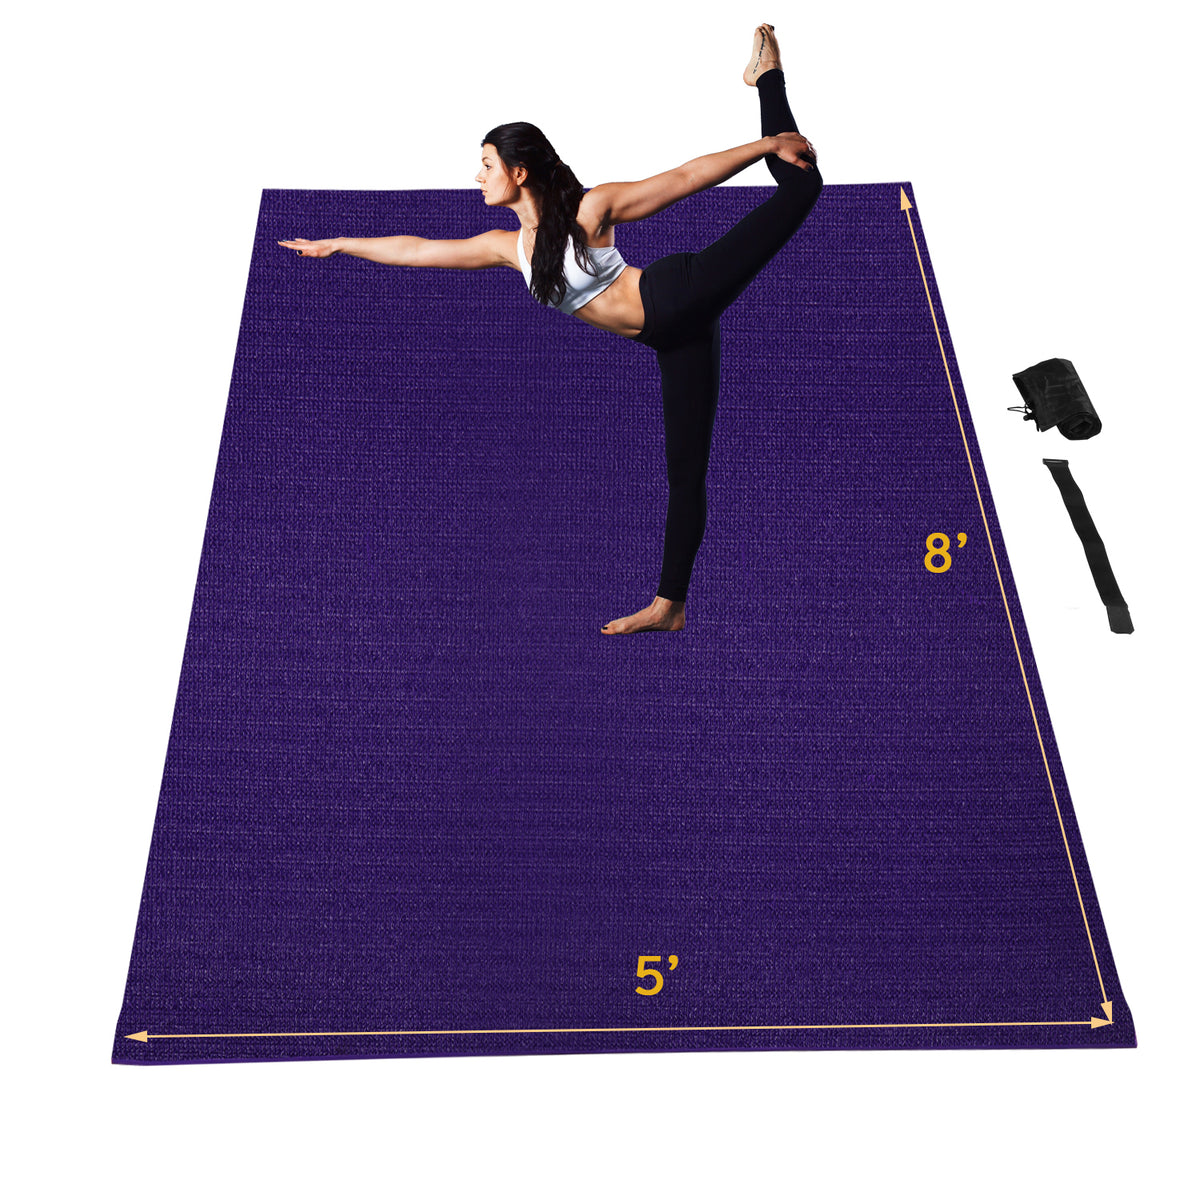 ZENOVA Large Workout Mat High Density Thick Exercise Mat 8'x5'/7'x5' x7mm Gym Flooring Cardio Mat, Shoe Friendly for All Intense Fitness and Home Workout